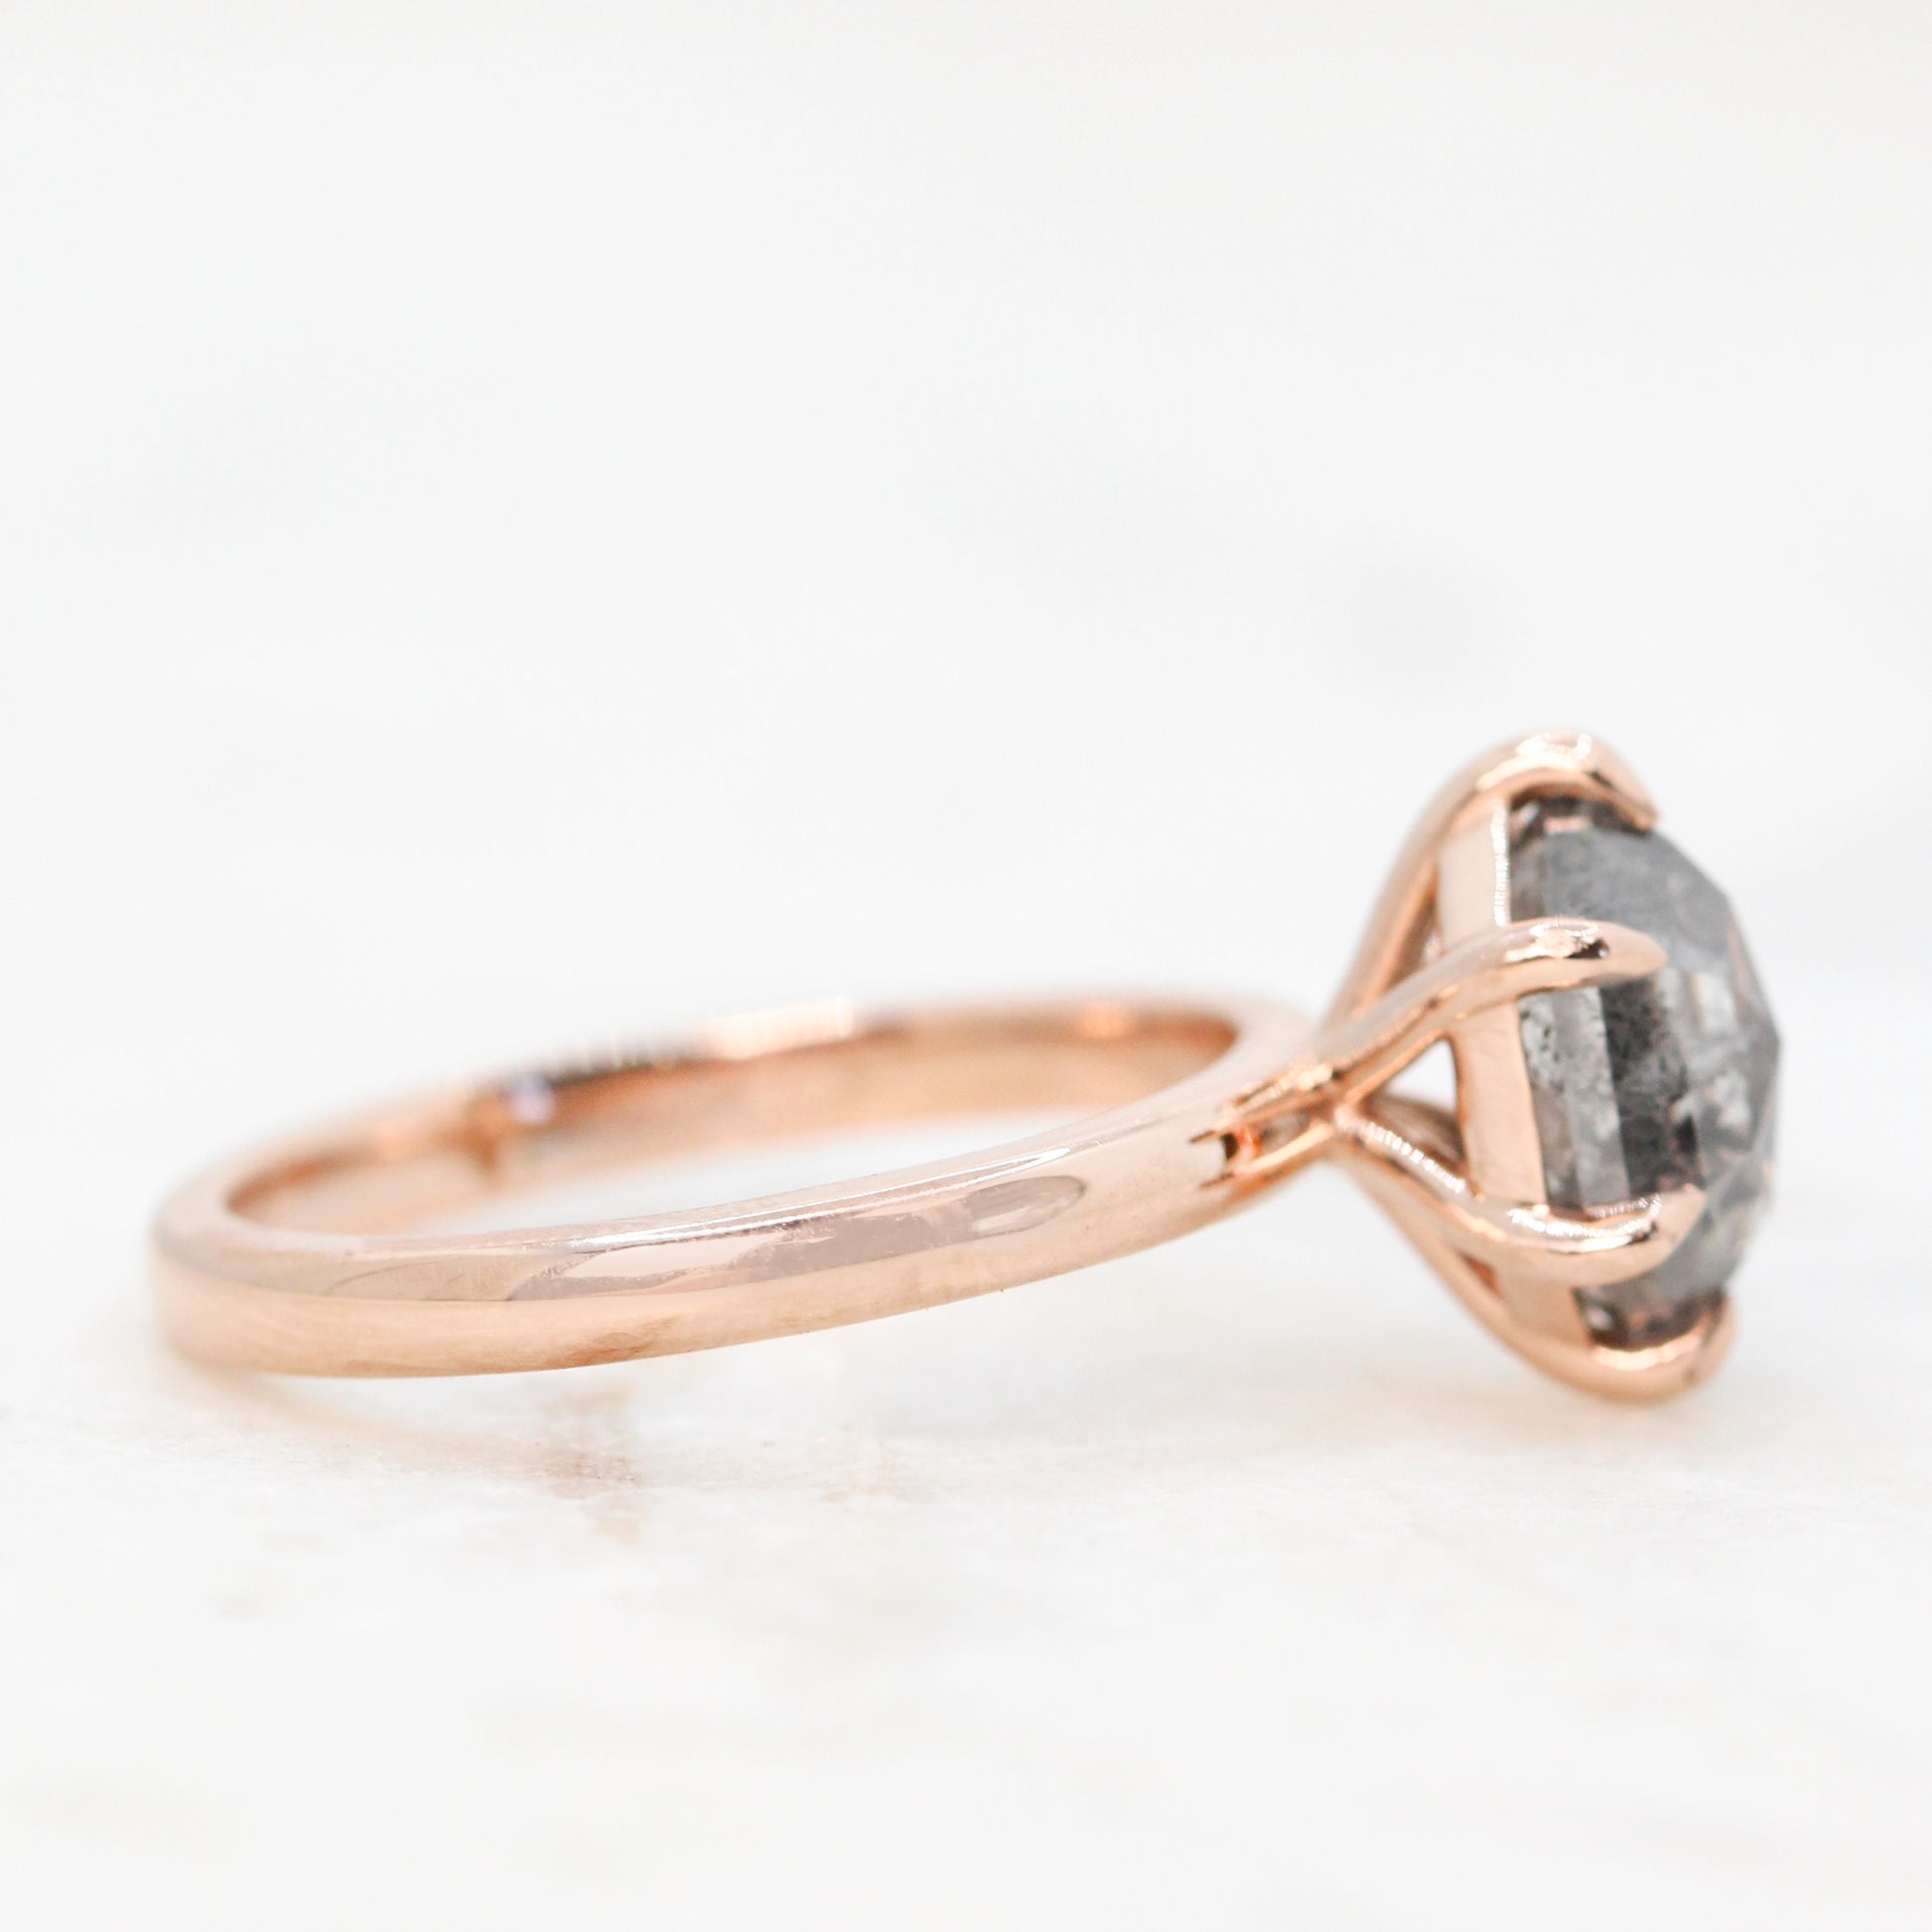 Charlotte Ring with a 2.34 Carat Dark & Clear Hexagon Diamond in 14k Rose Gold - Ready to Size and Ship - Midwinter Co. Alternative Bridal Rings and Modern Fine Jewelry